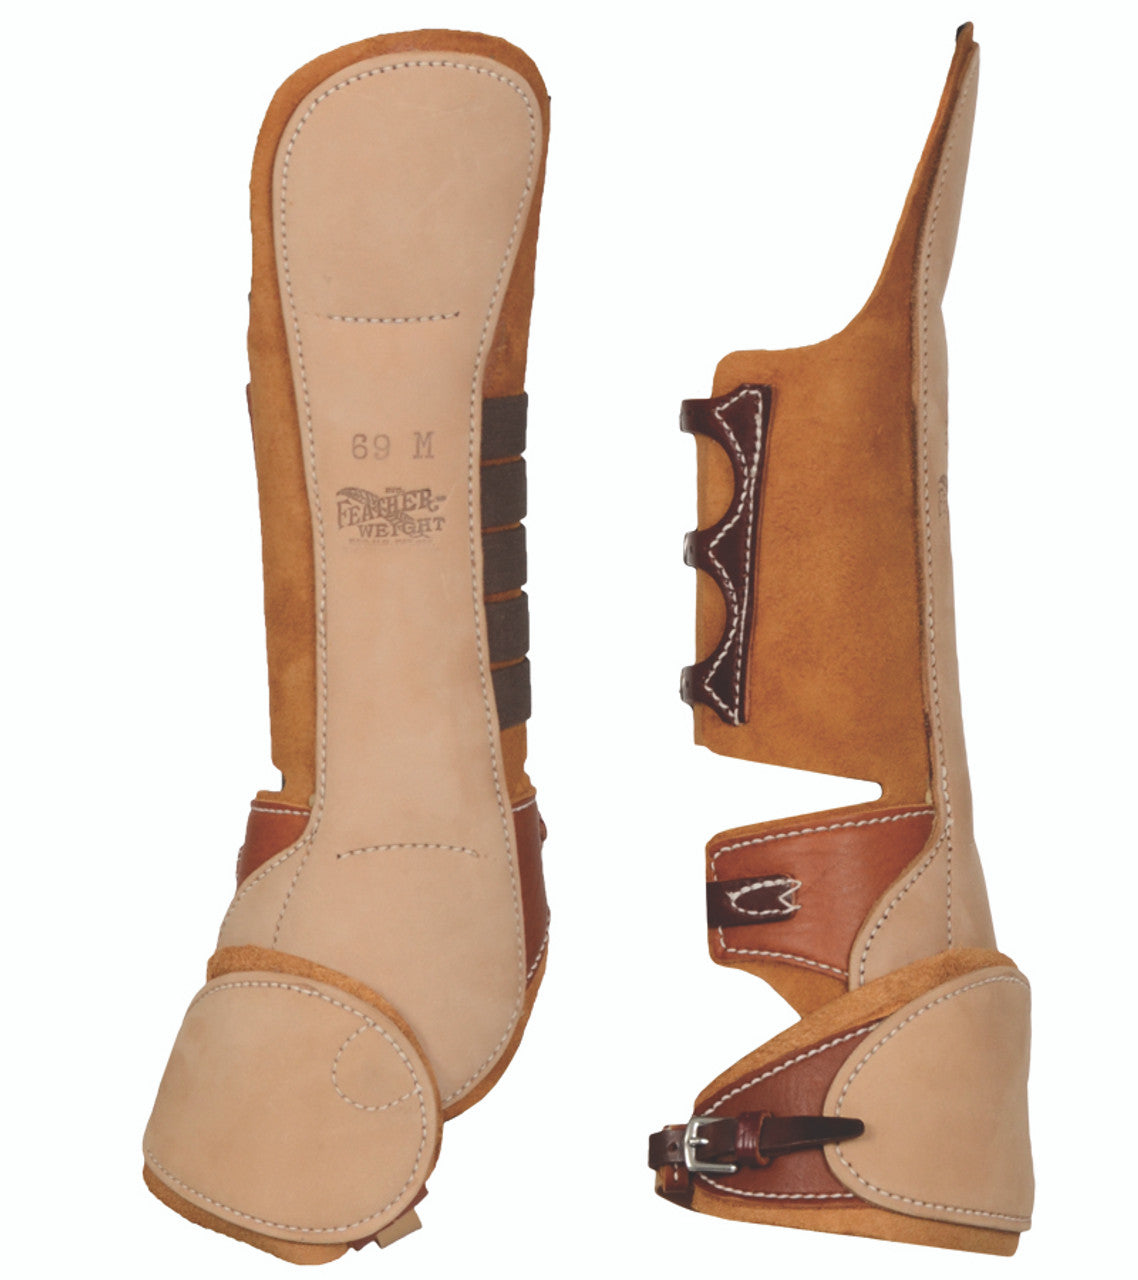 LITE-N-TUFF Feather-Weight Half Hock Shin & Ankle Boots-TexanSaddles.com